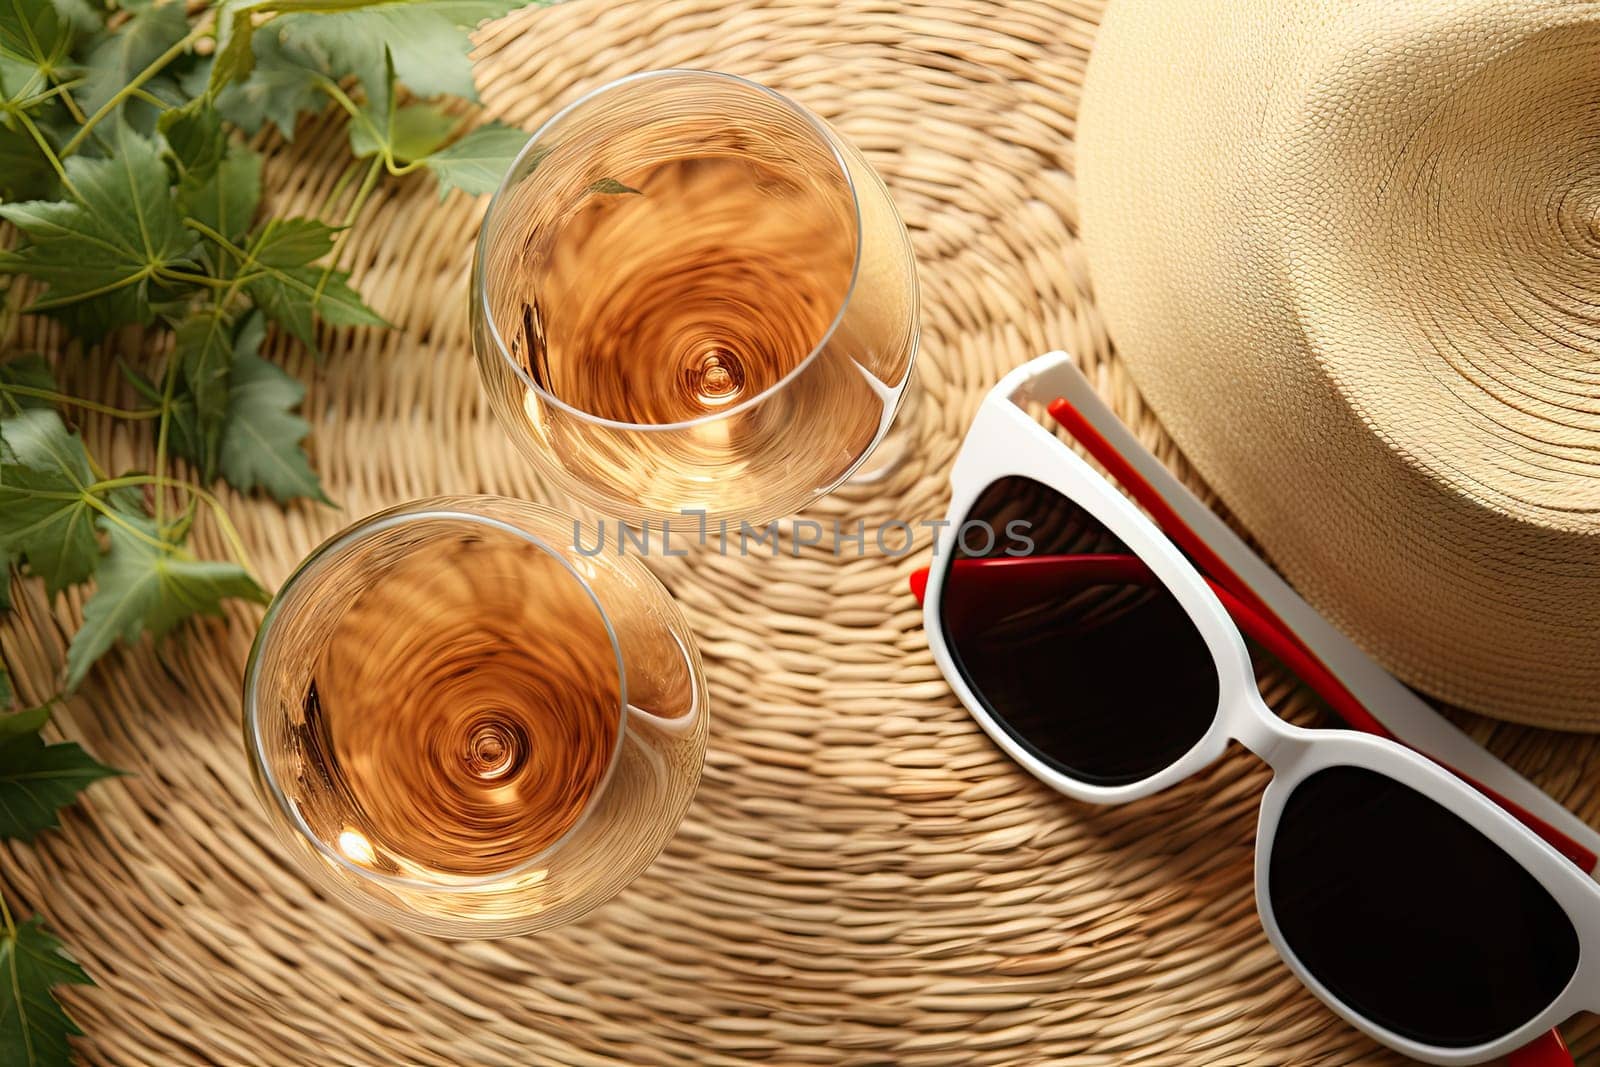 The Perfect Summer Accessories: A Straw Hat, Sunglasses, and A Cool Breeze